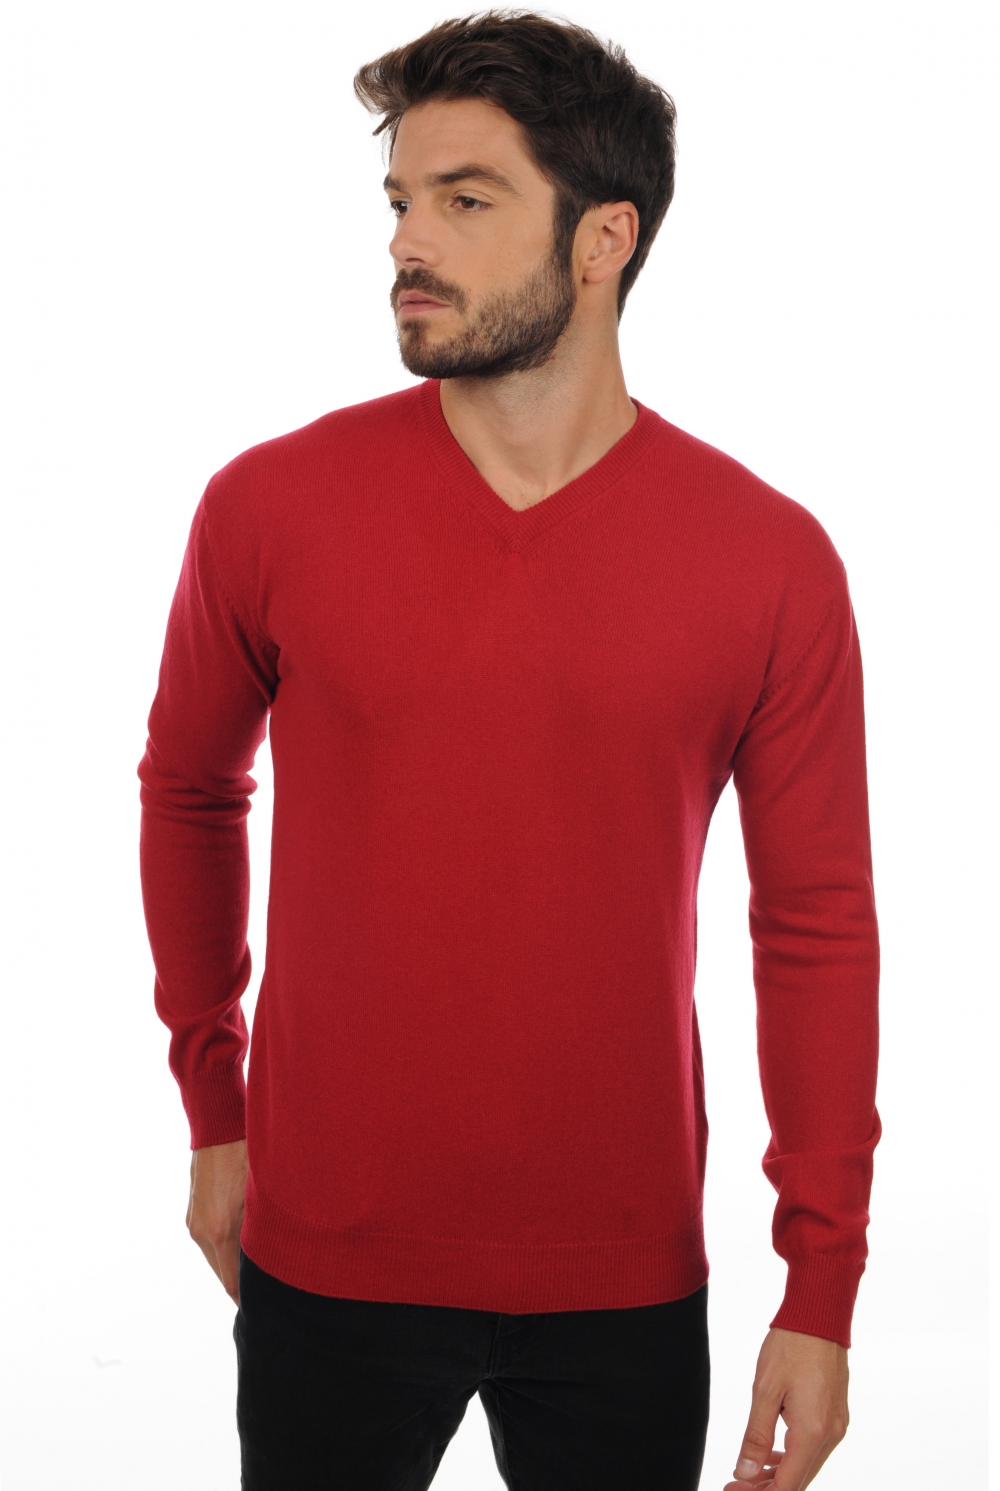 Cachemire pull homme maddox rouge velours 3xl